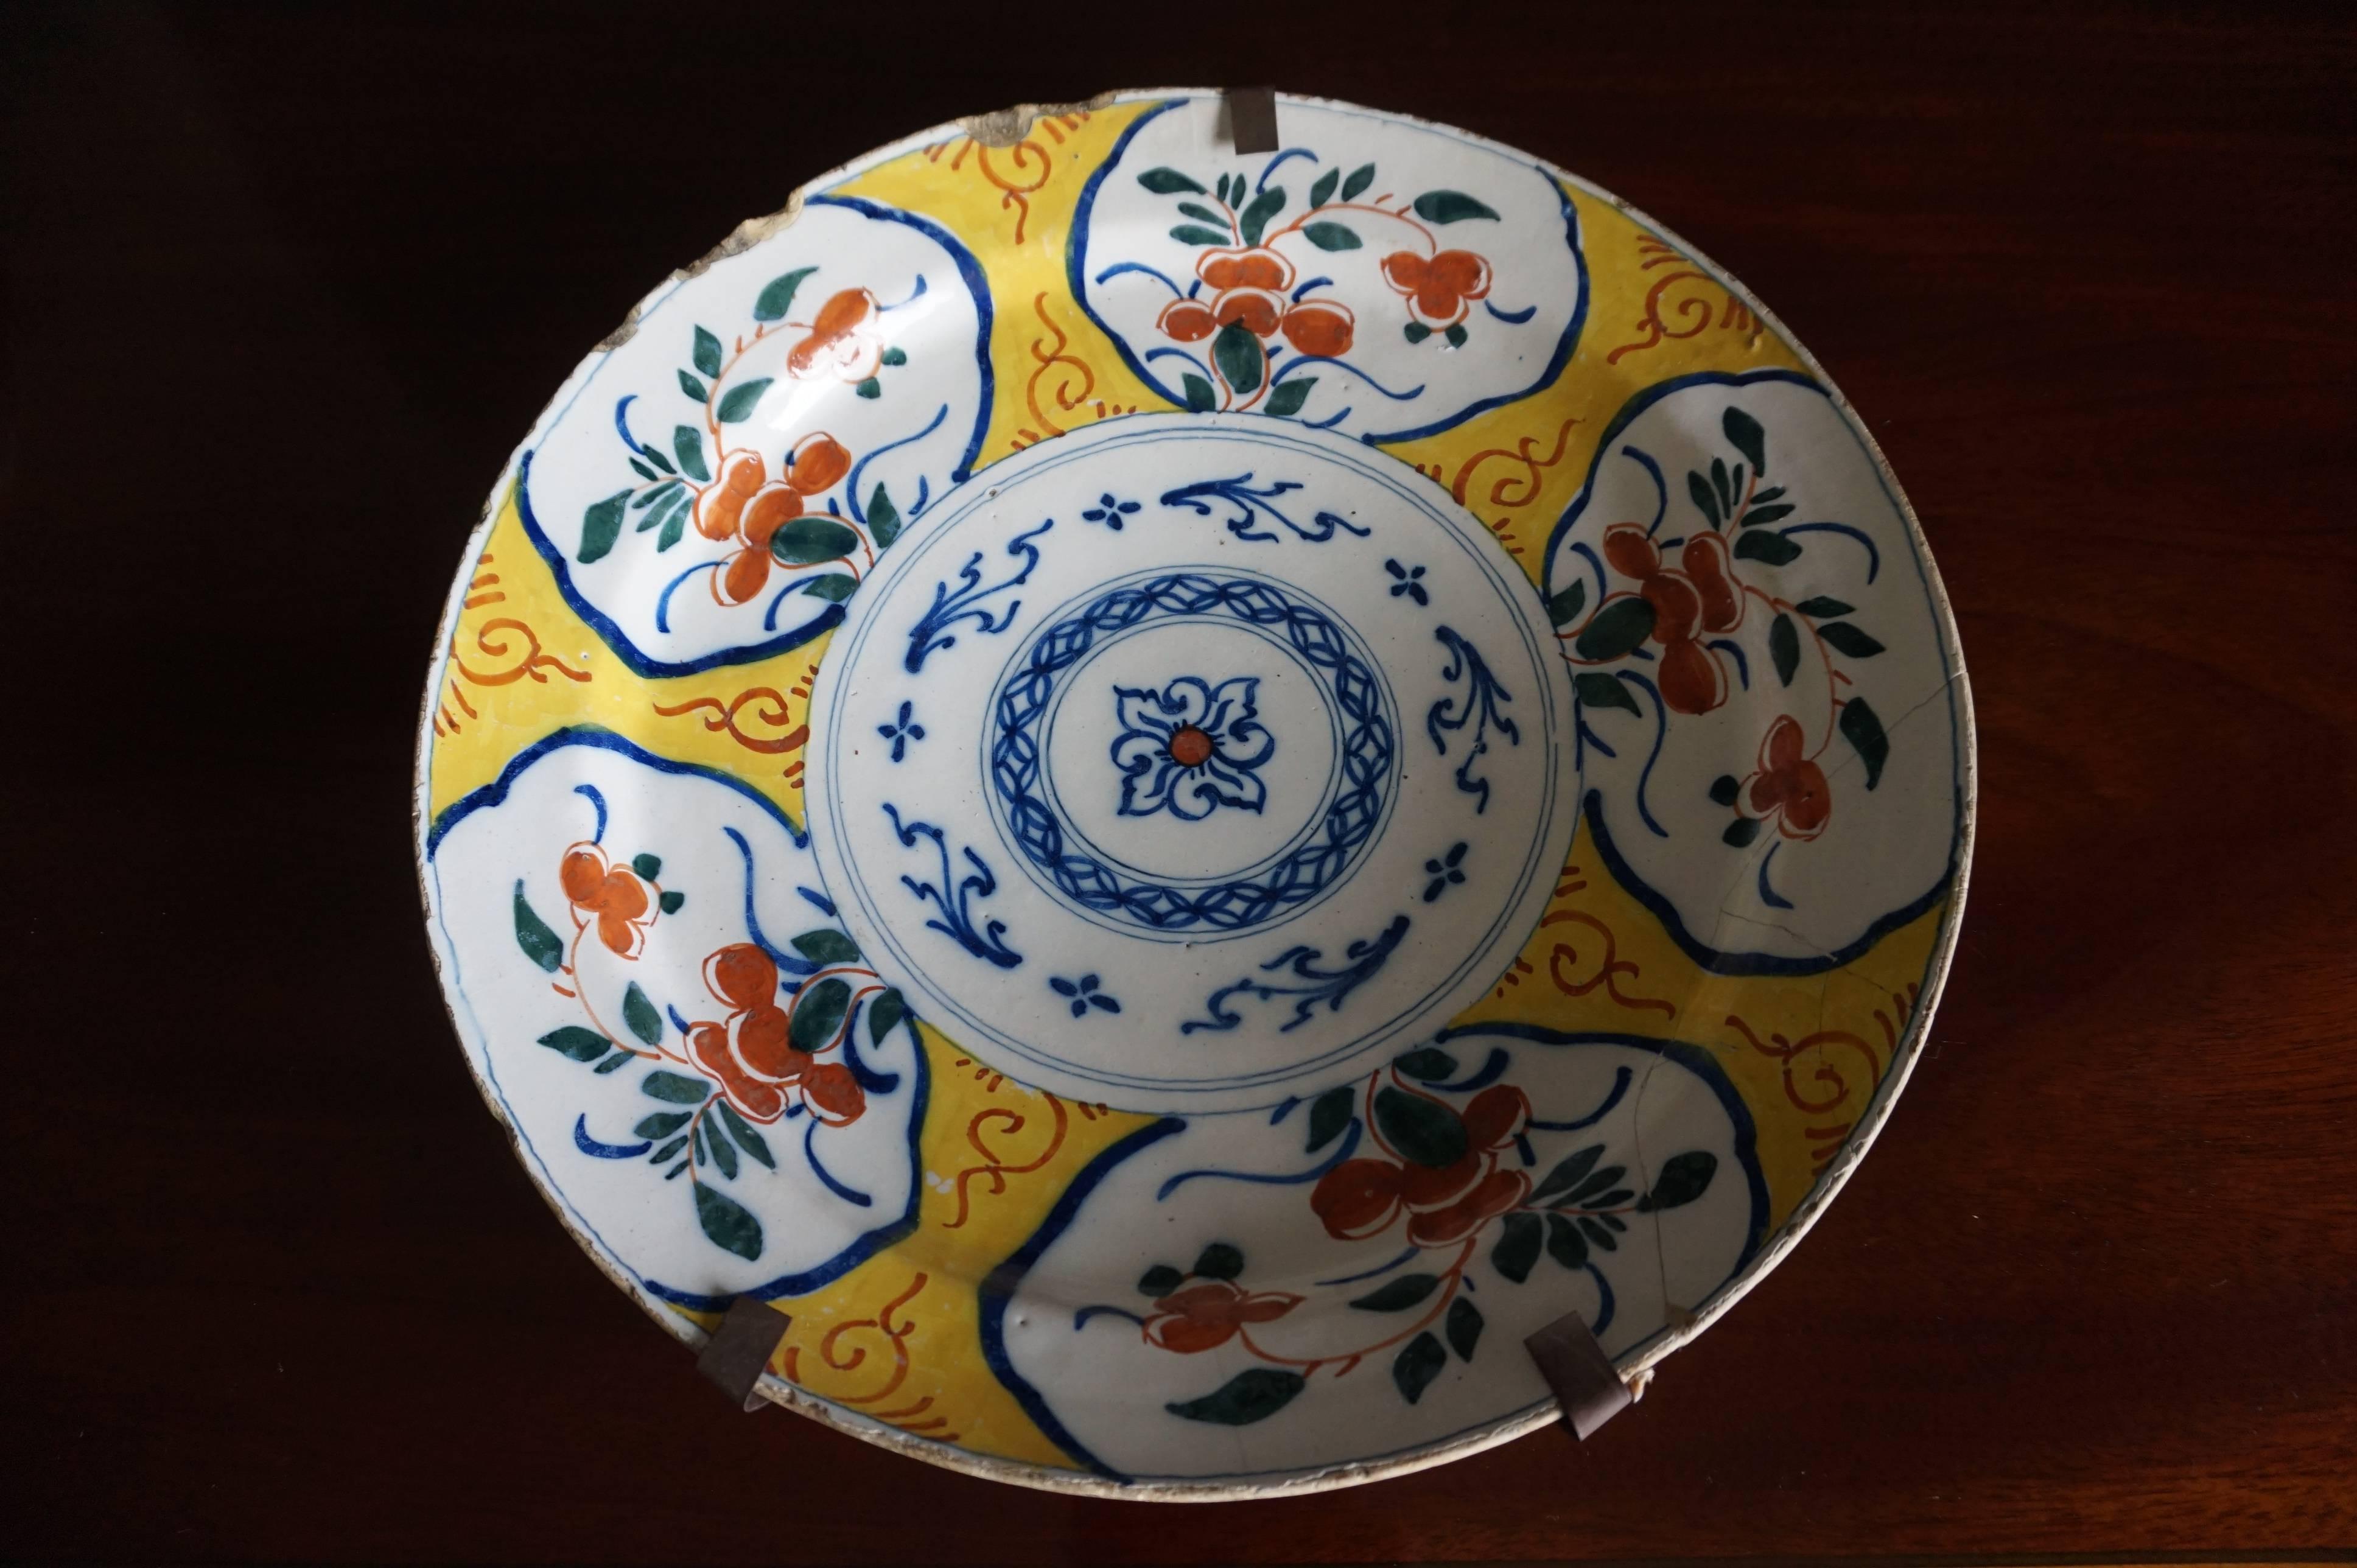 Mid to late 1700's pair of sizable and polychrome painted Dutch chargers.

Even if you were to spent every day of the rest of your life searching, you would not find another pair of these rare Dutch chargers. These chargers are extra rare,